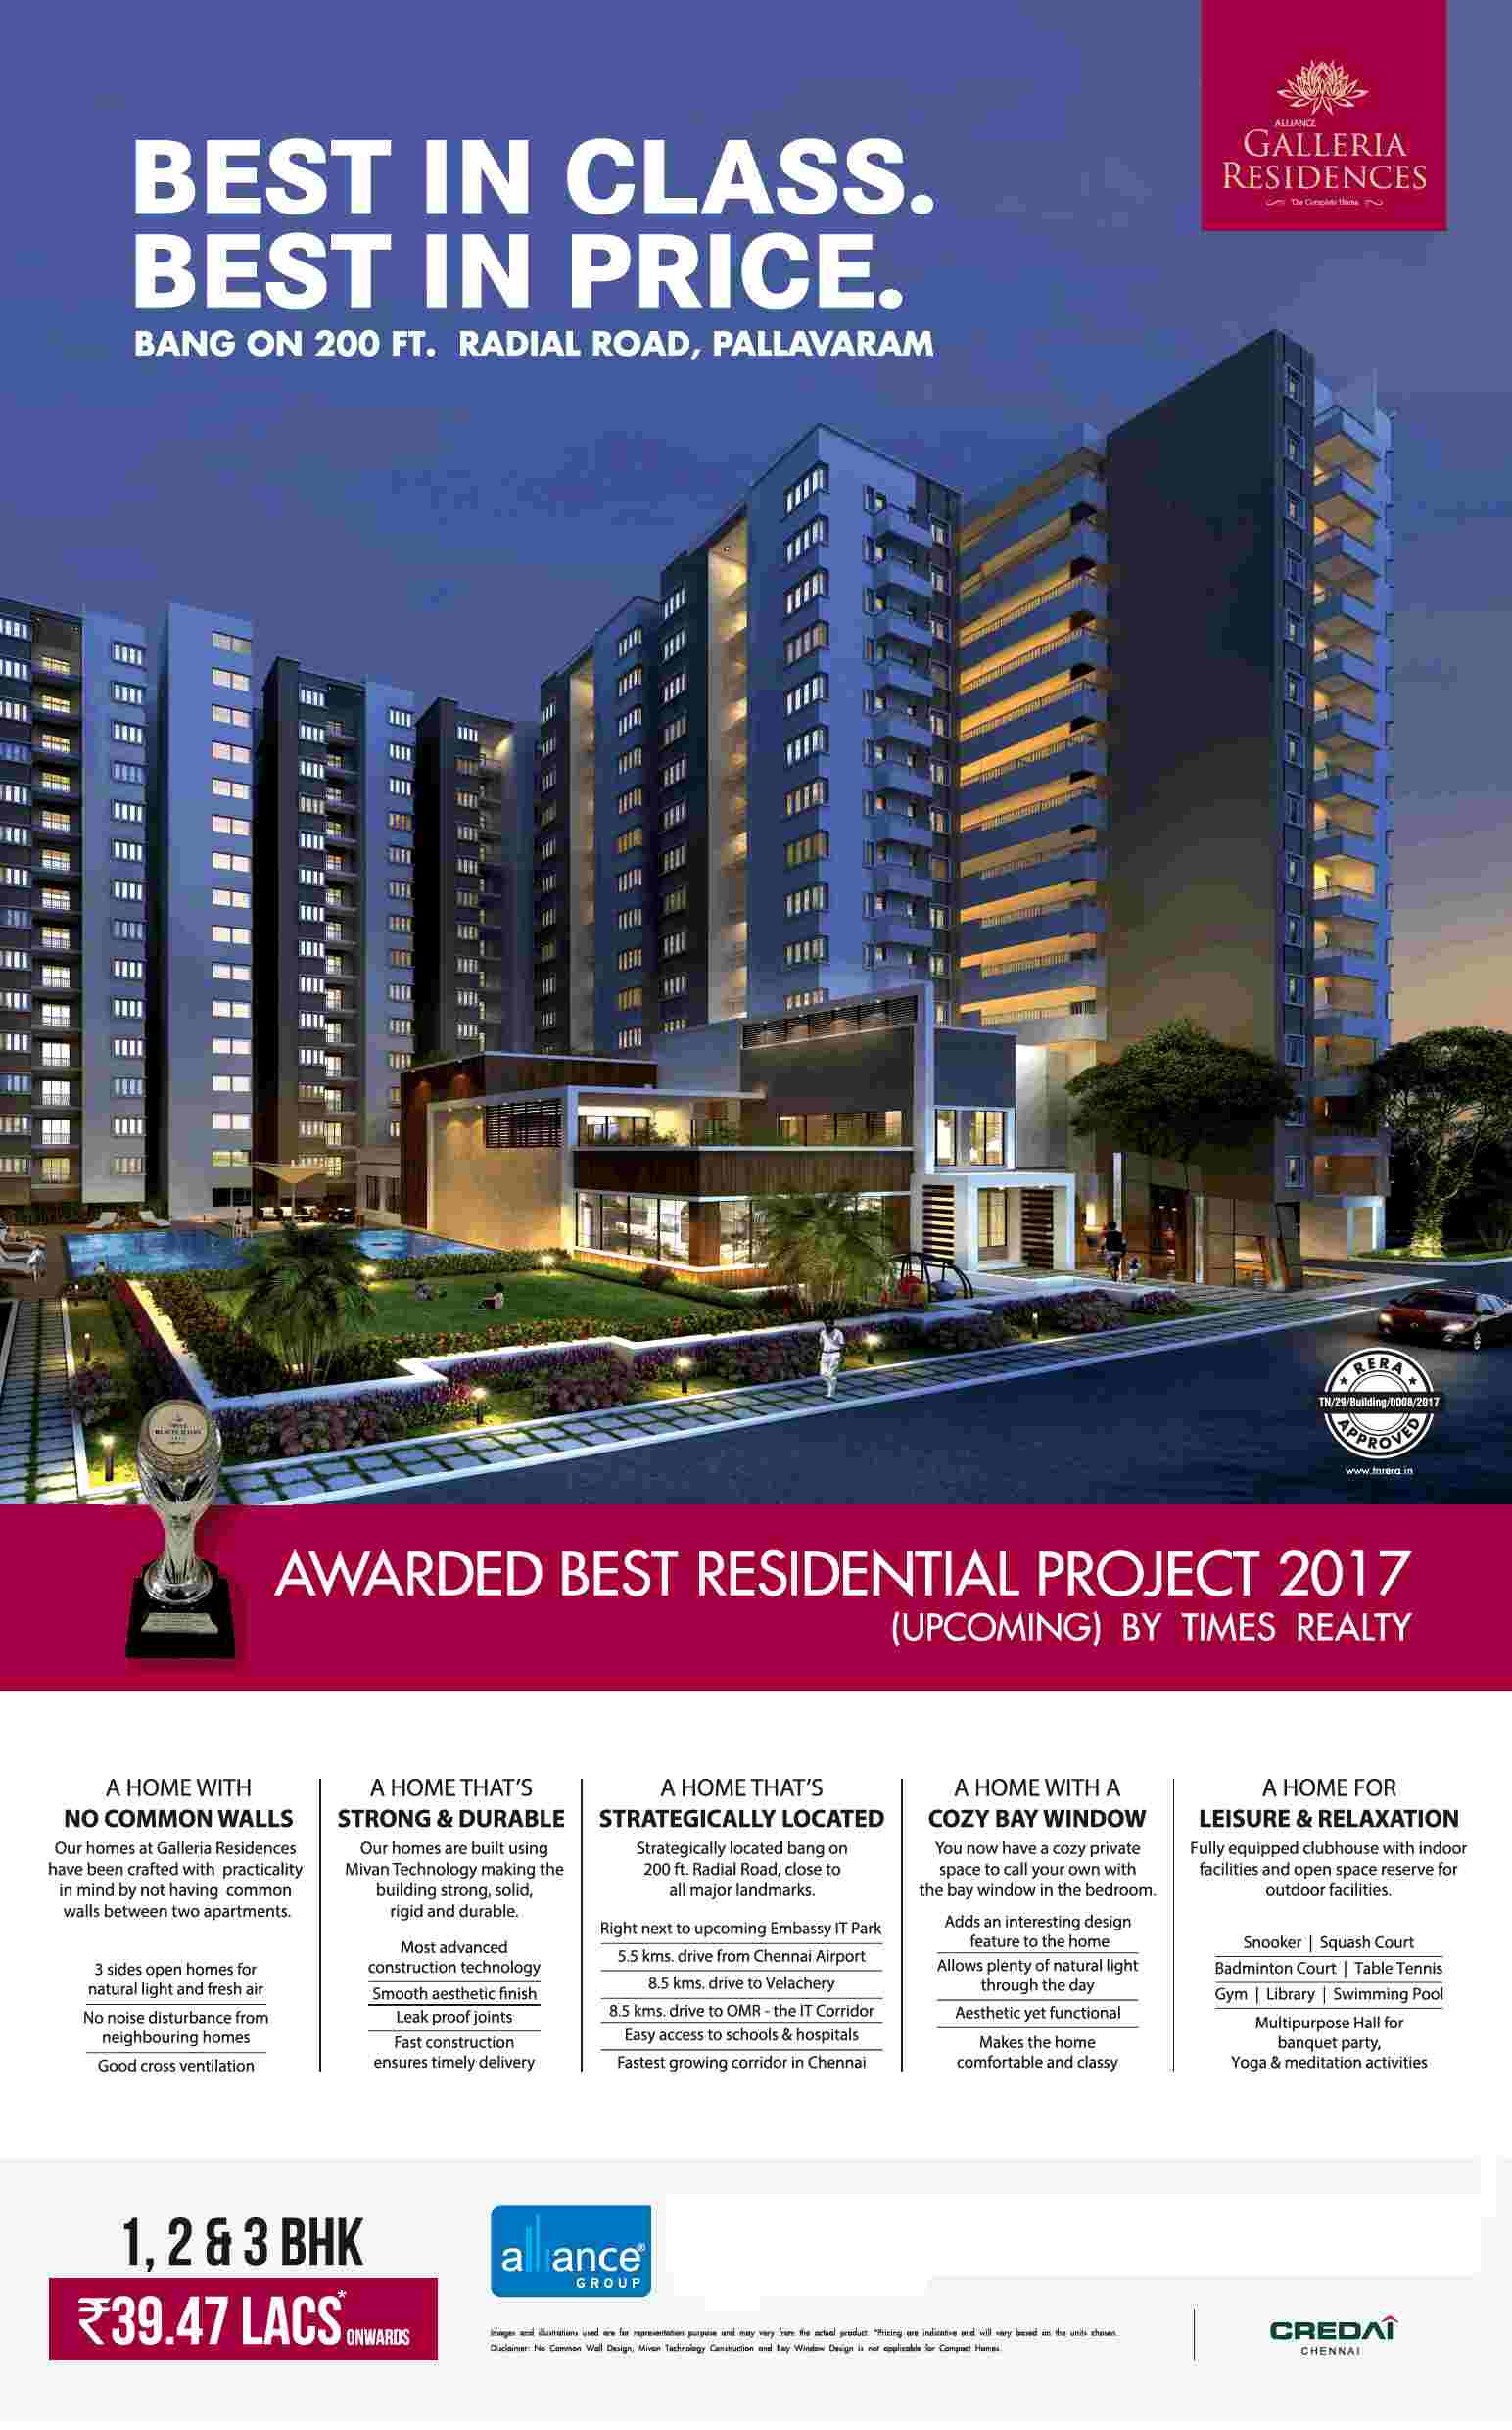 Alliance Galleria Residences awarded Best Residential Project 2017 (upcoming)